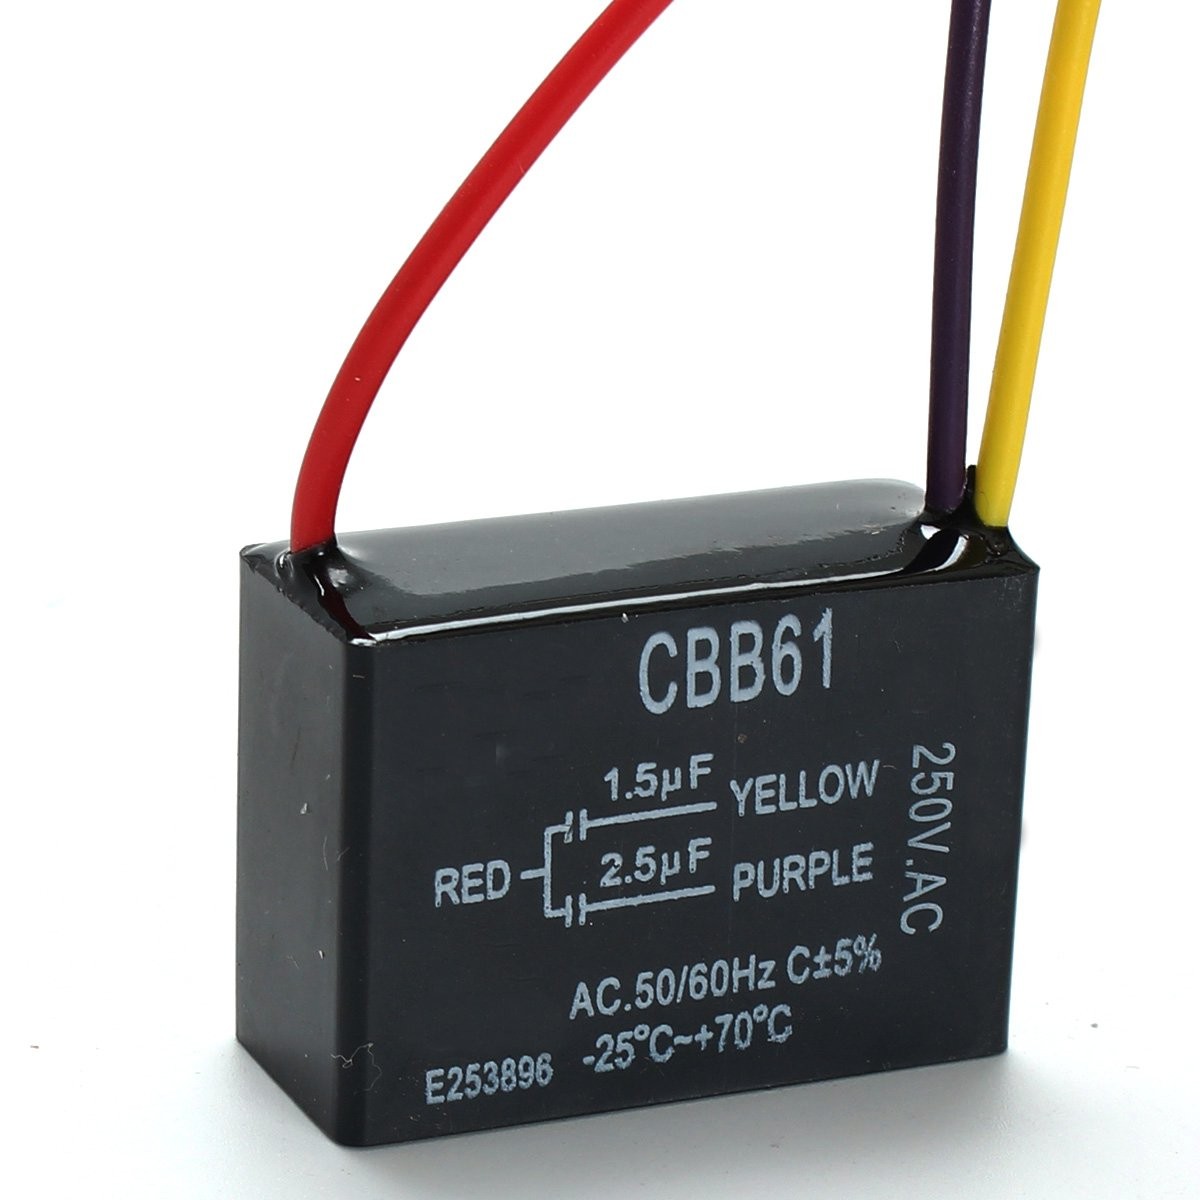 

CBB61 1.5uF+2.5uF 3 WIRE 250VAC Ceiling Fan Capacitor 3 Wires